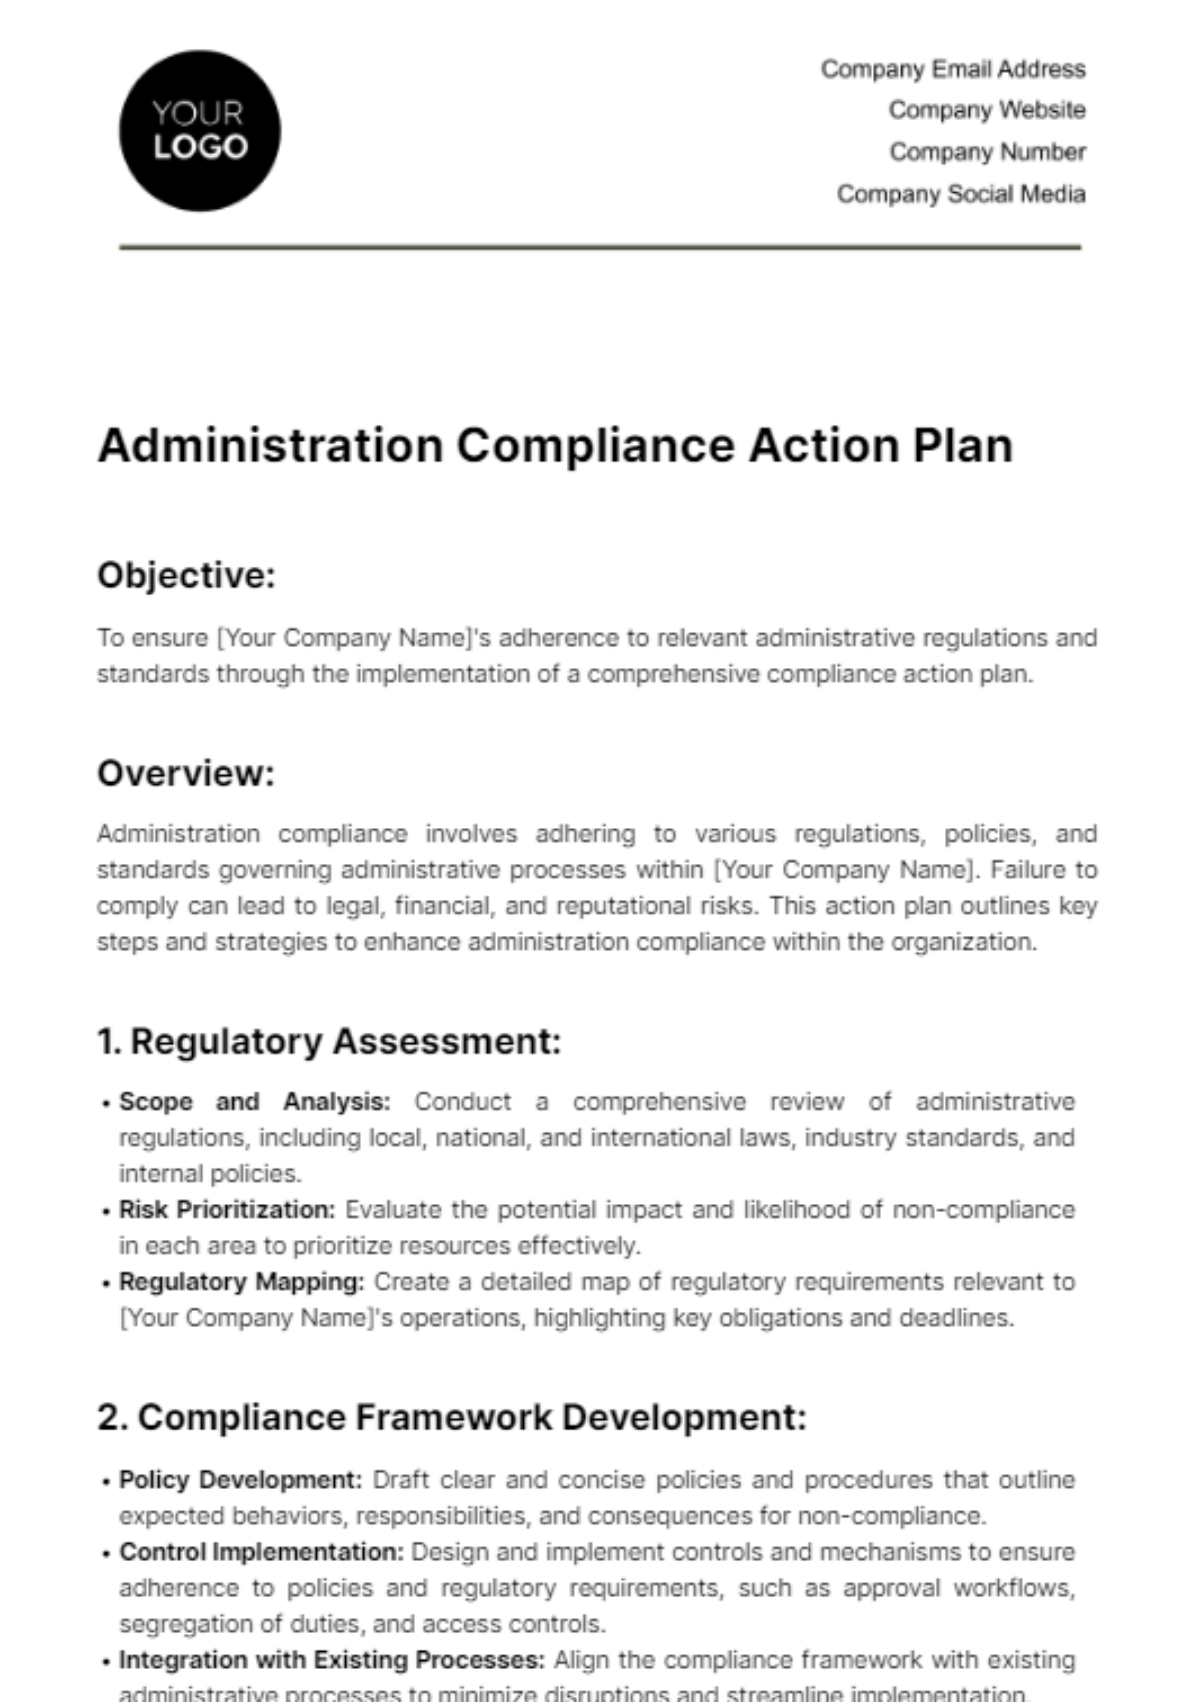 Free Administration Compliance Action Plan Template